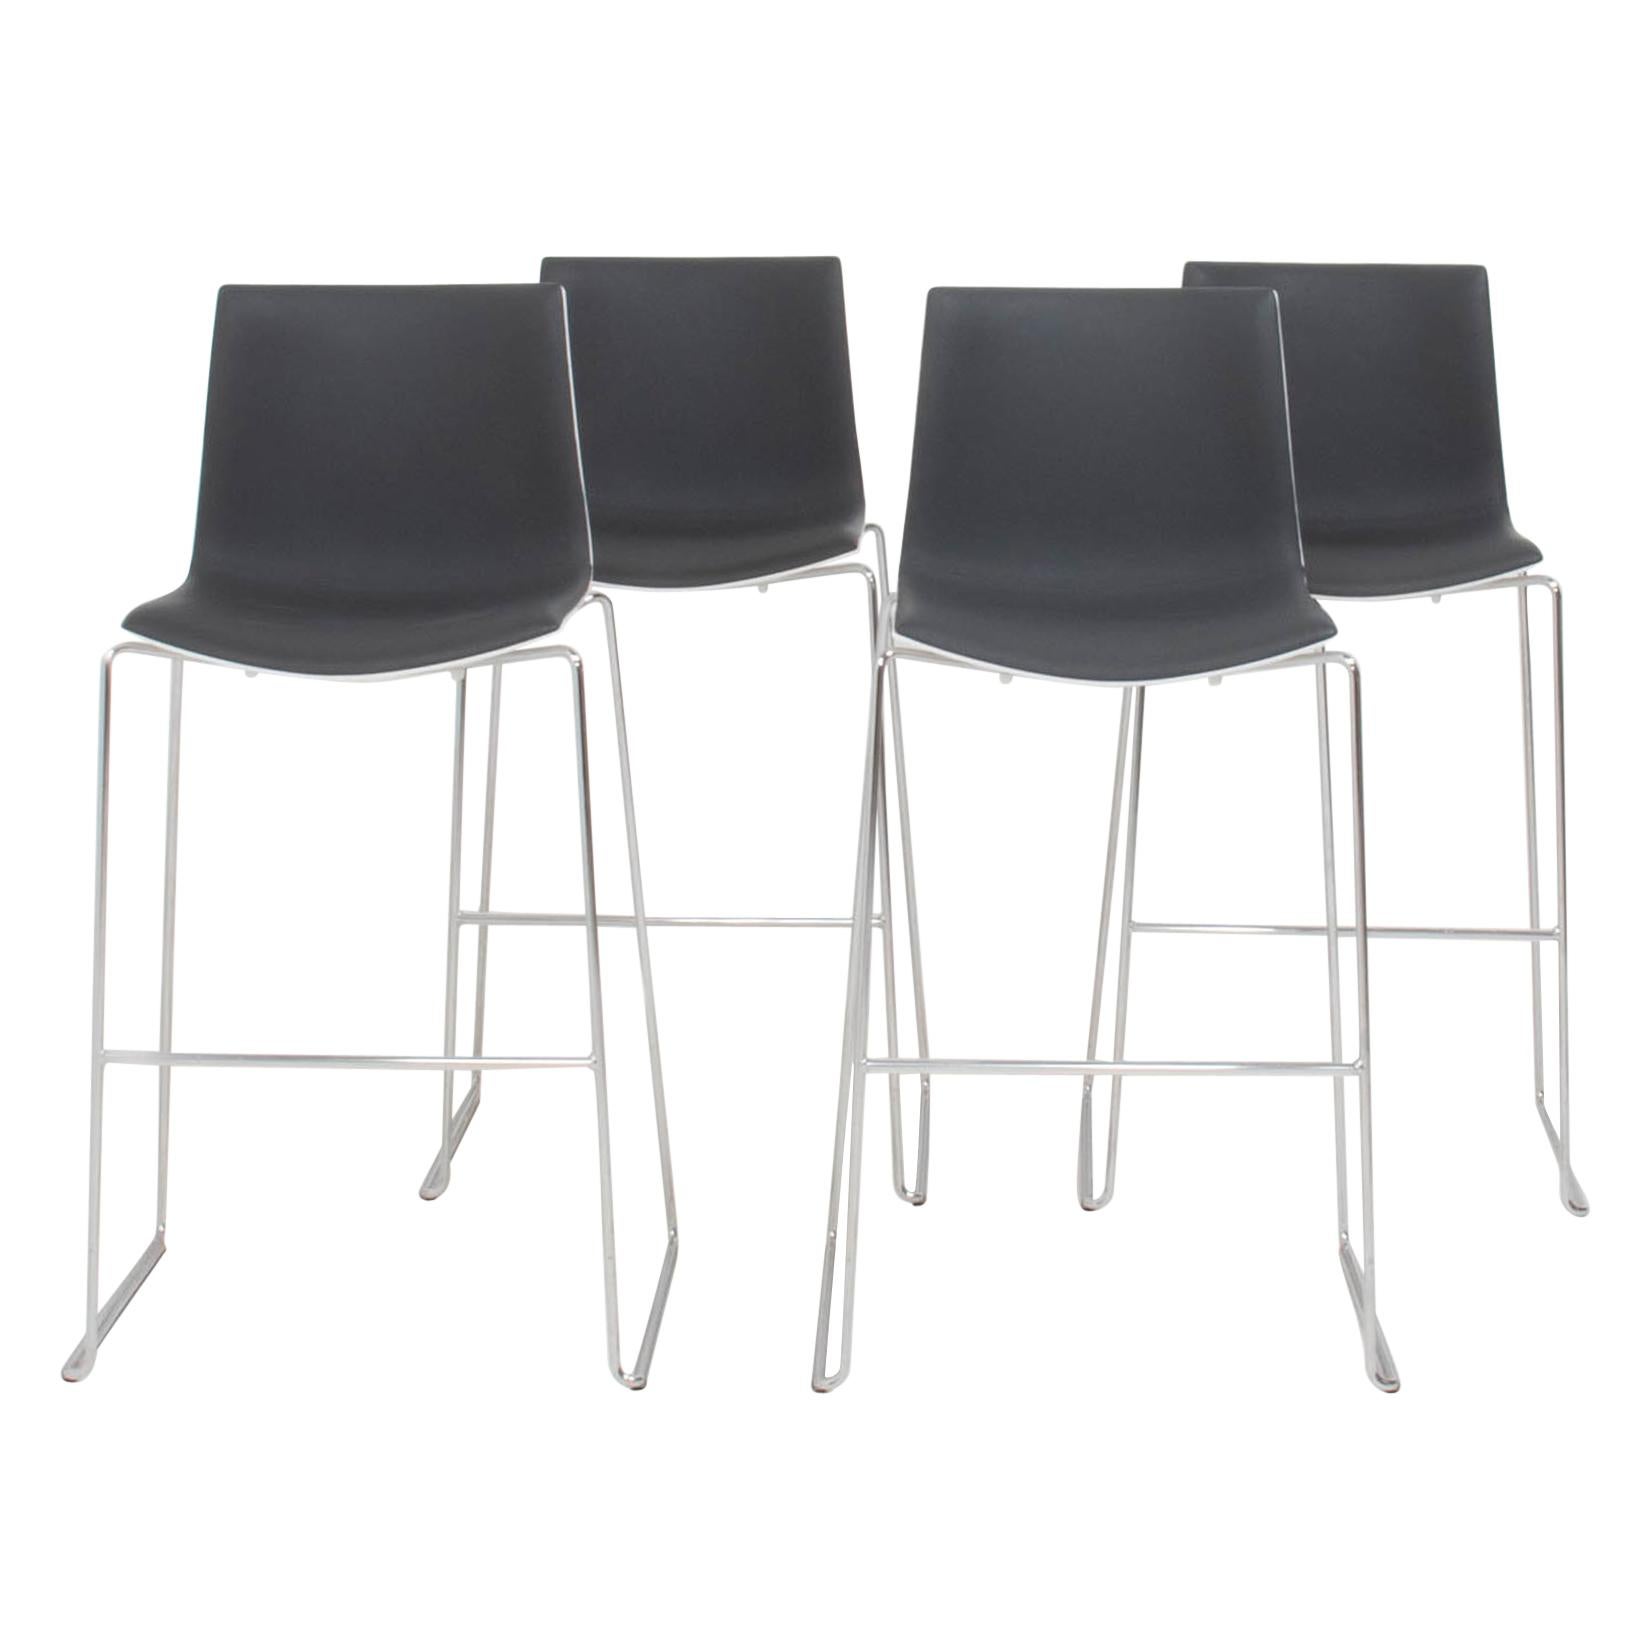 Arper by Antti Kotilainen Aava Grey and White Bar Stools, Set of 4, 2013